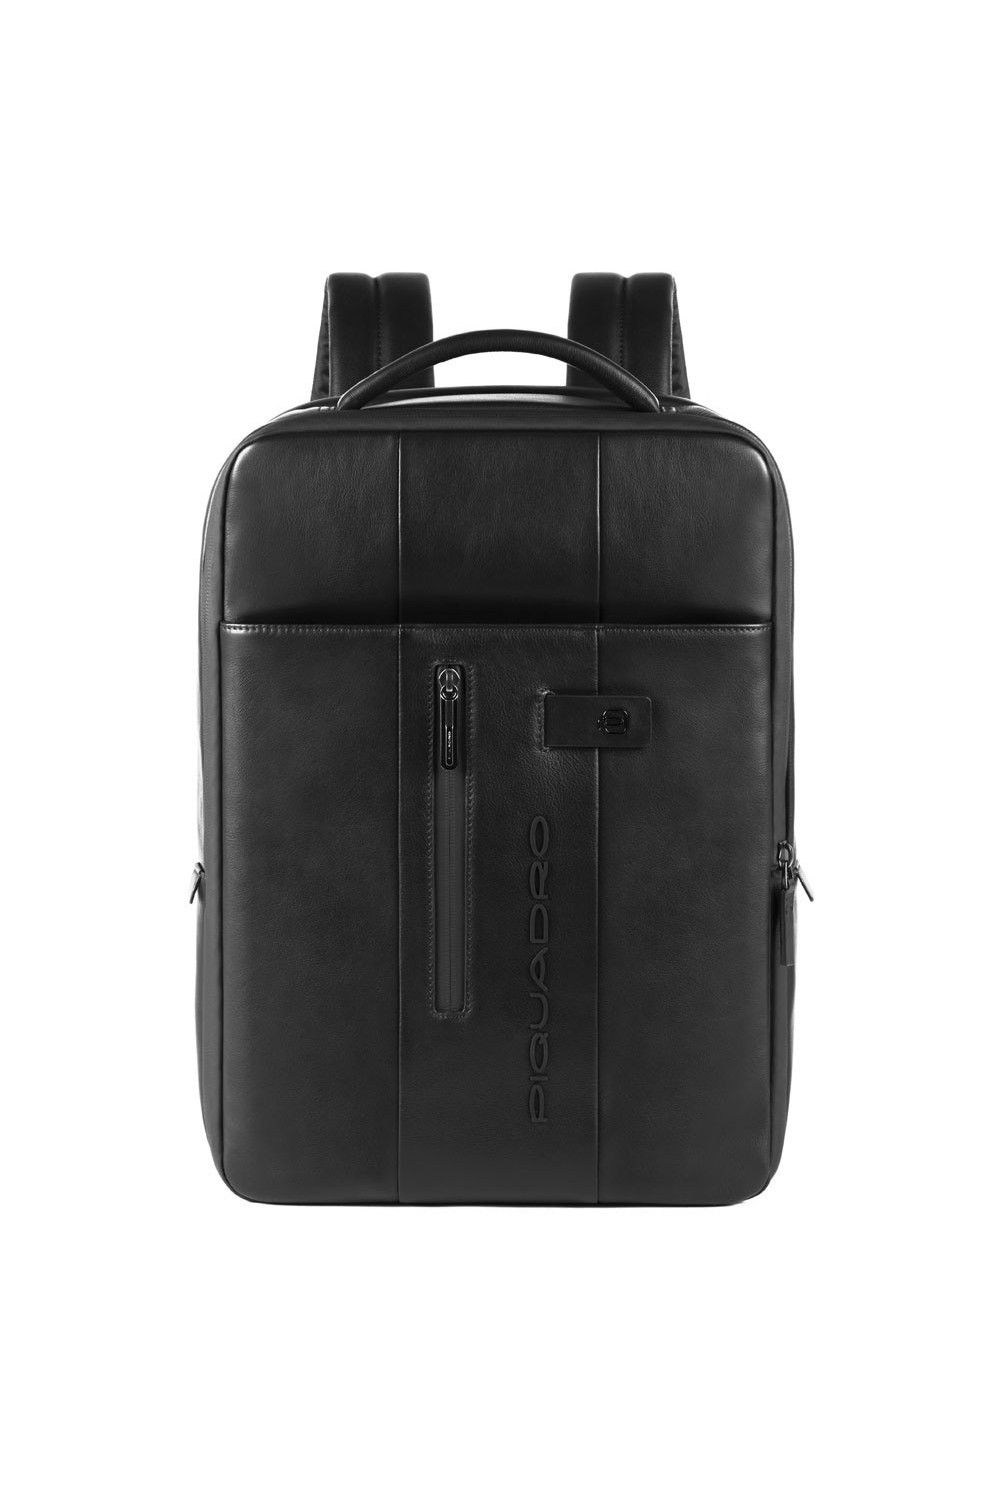 Expandable Laptop Backpack Piquadro Urban 15.6 inches